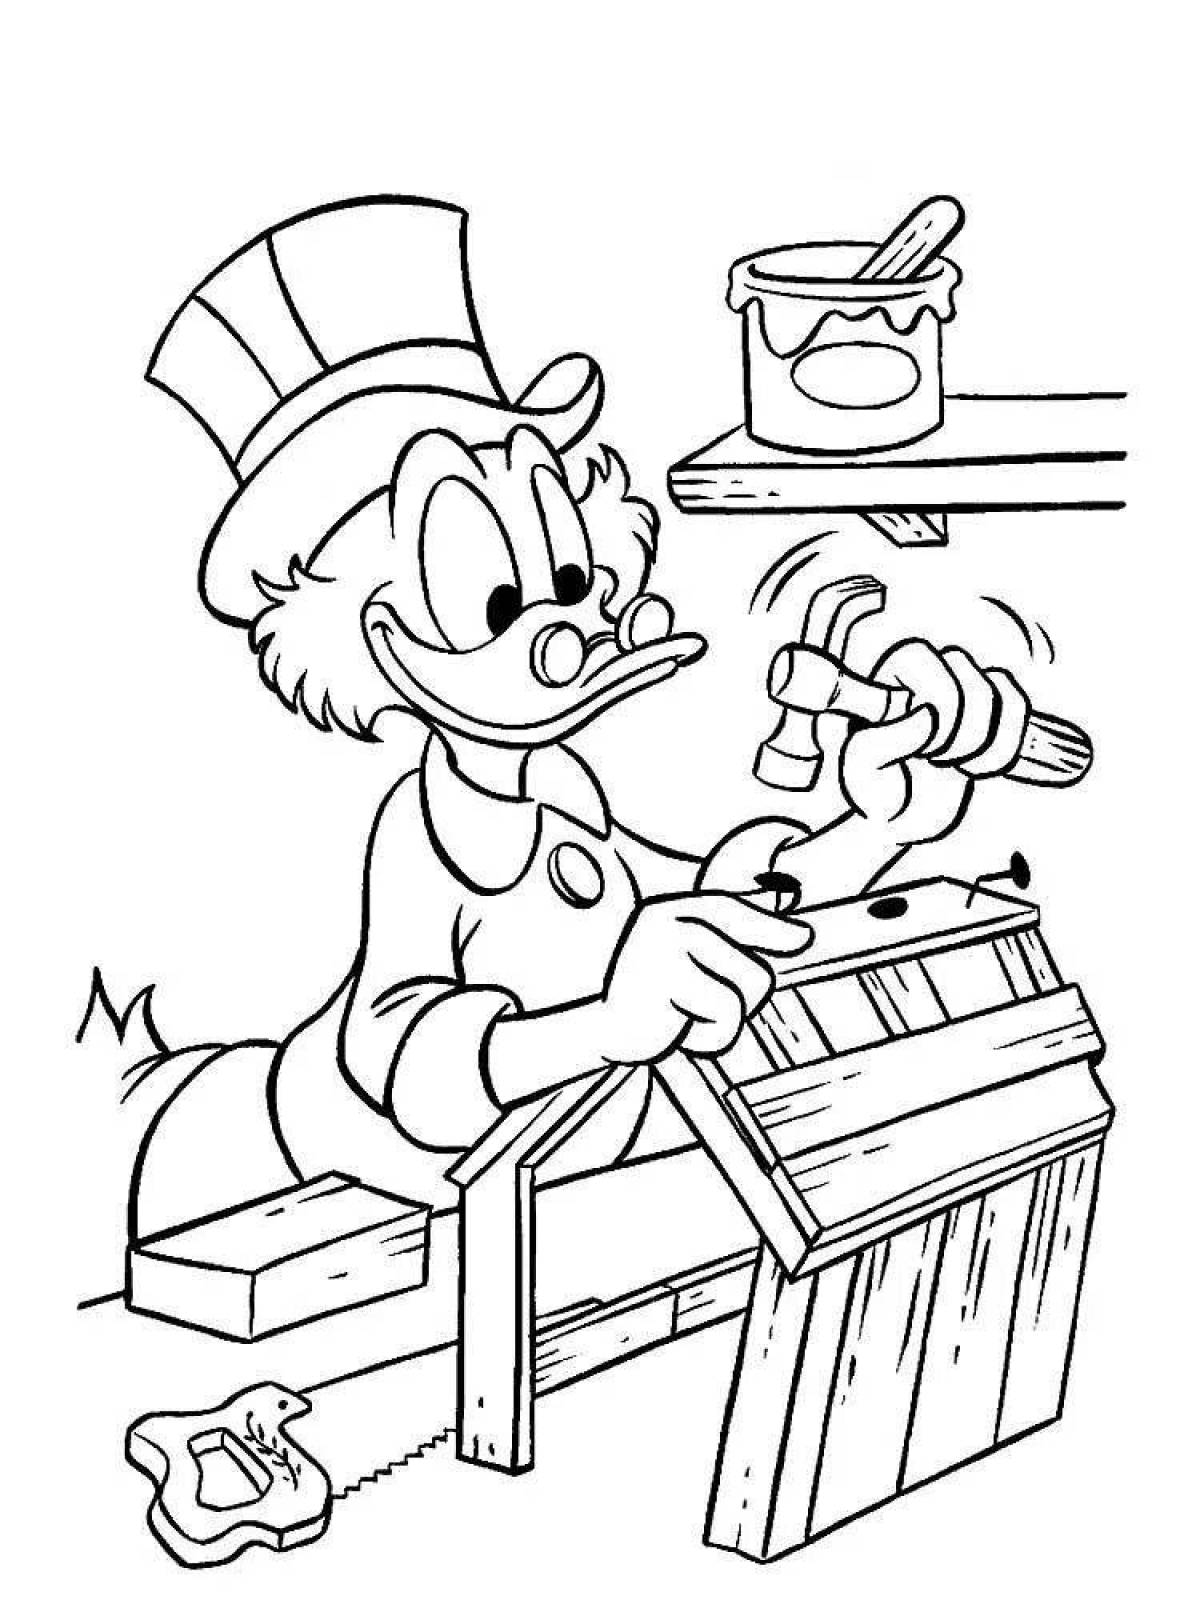 Coloring book magical scrooge